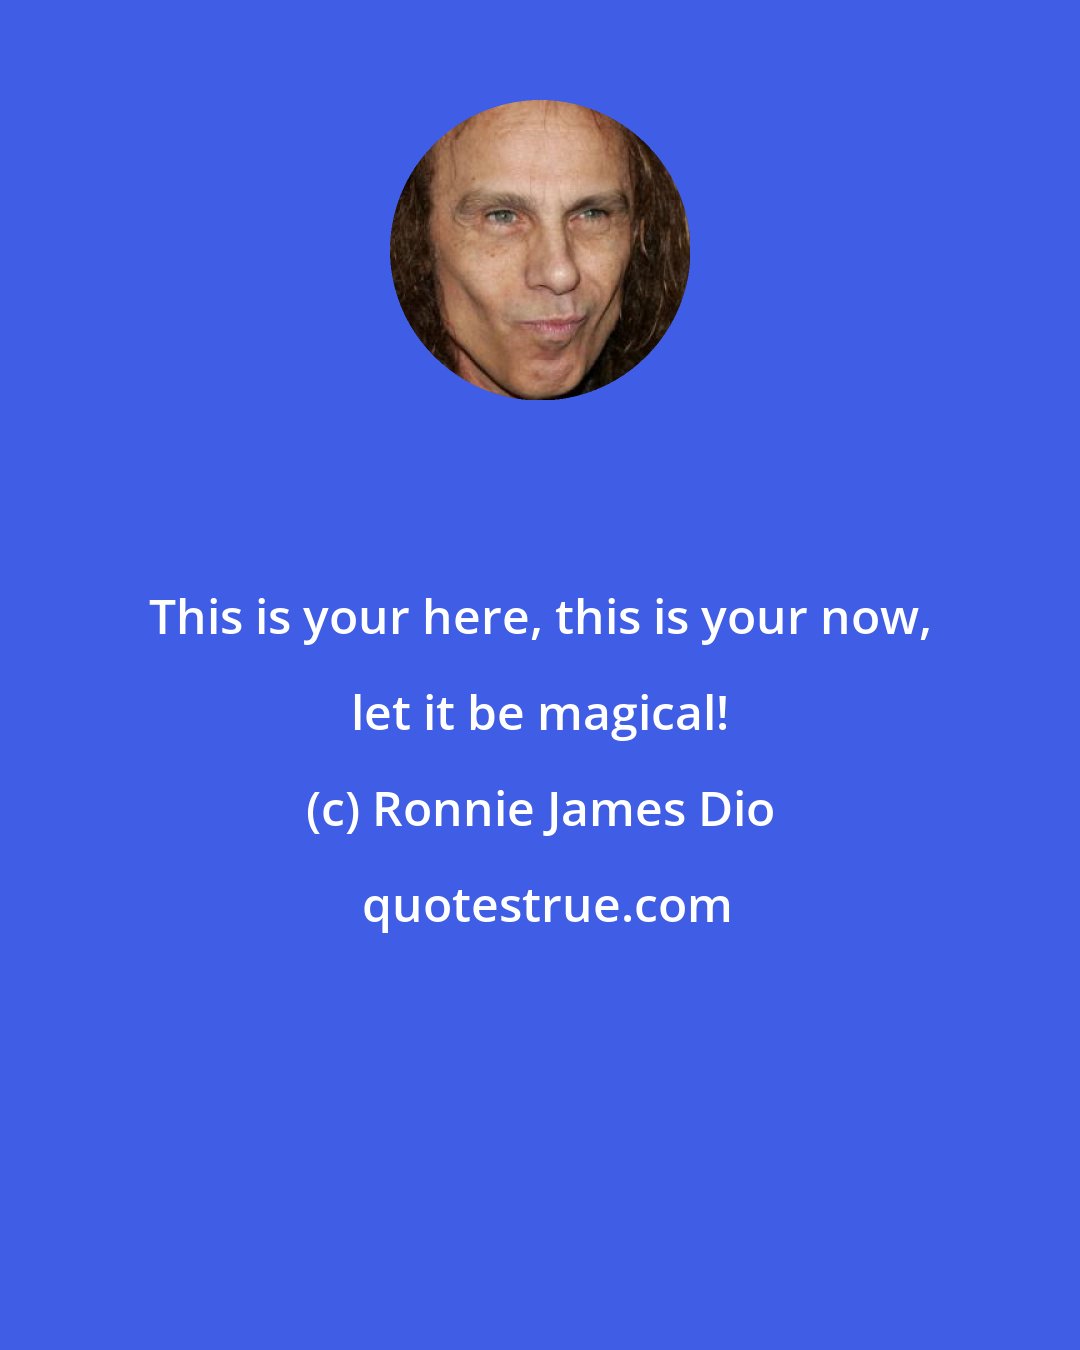 Ronnie James Dio: This is your here, this is your now, let it be magical!